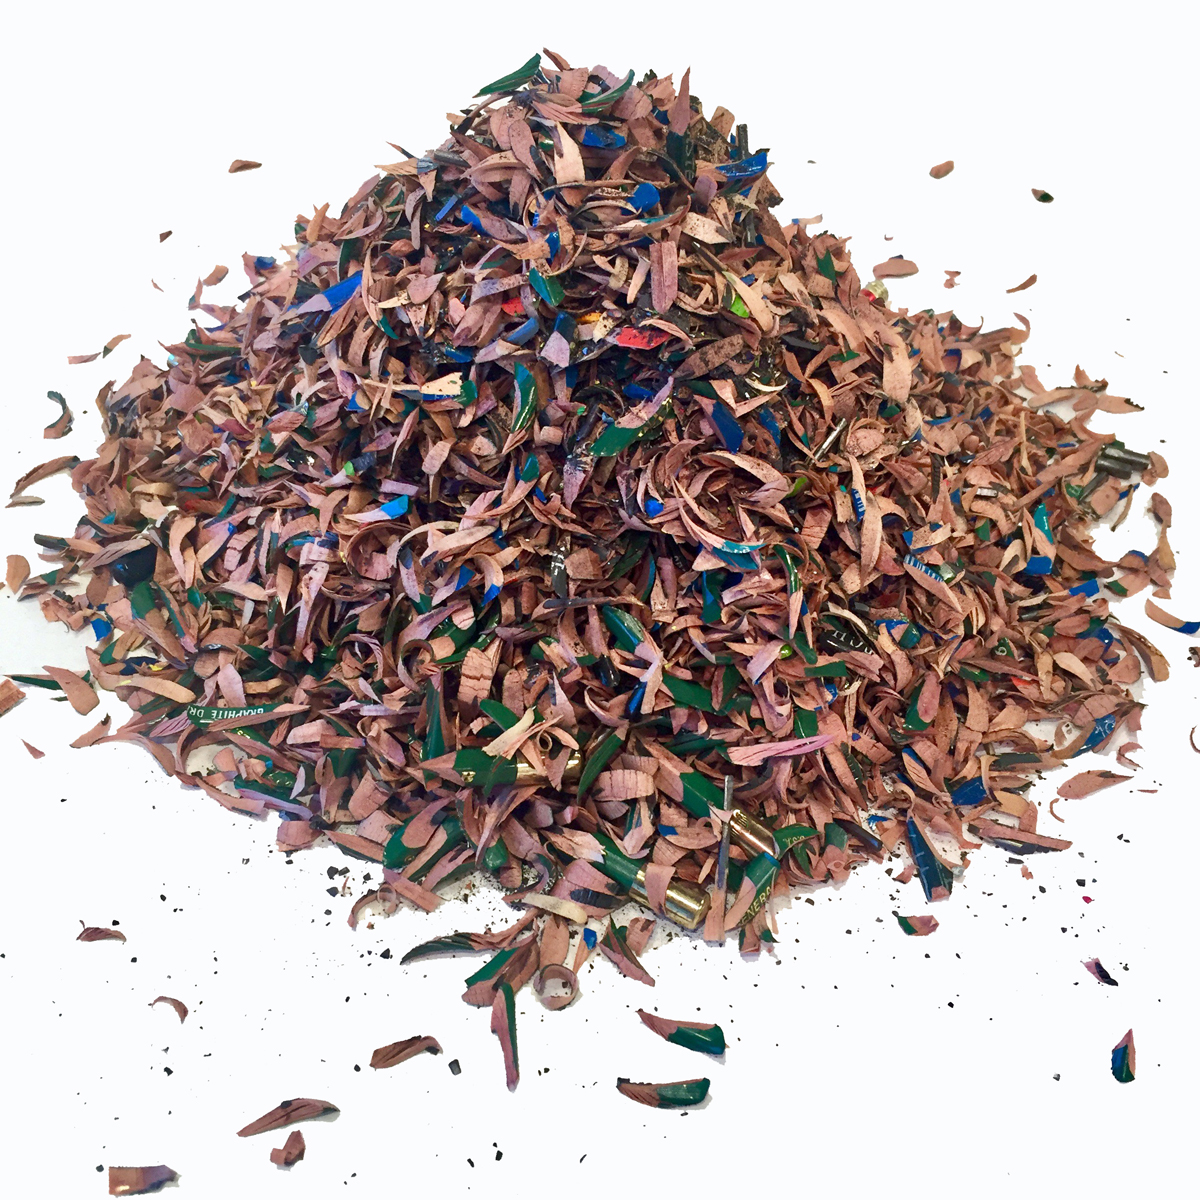 Sheila Ghidini, pencil shavings from various drawing projects, 2015-present.